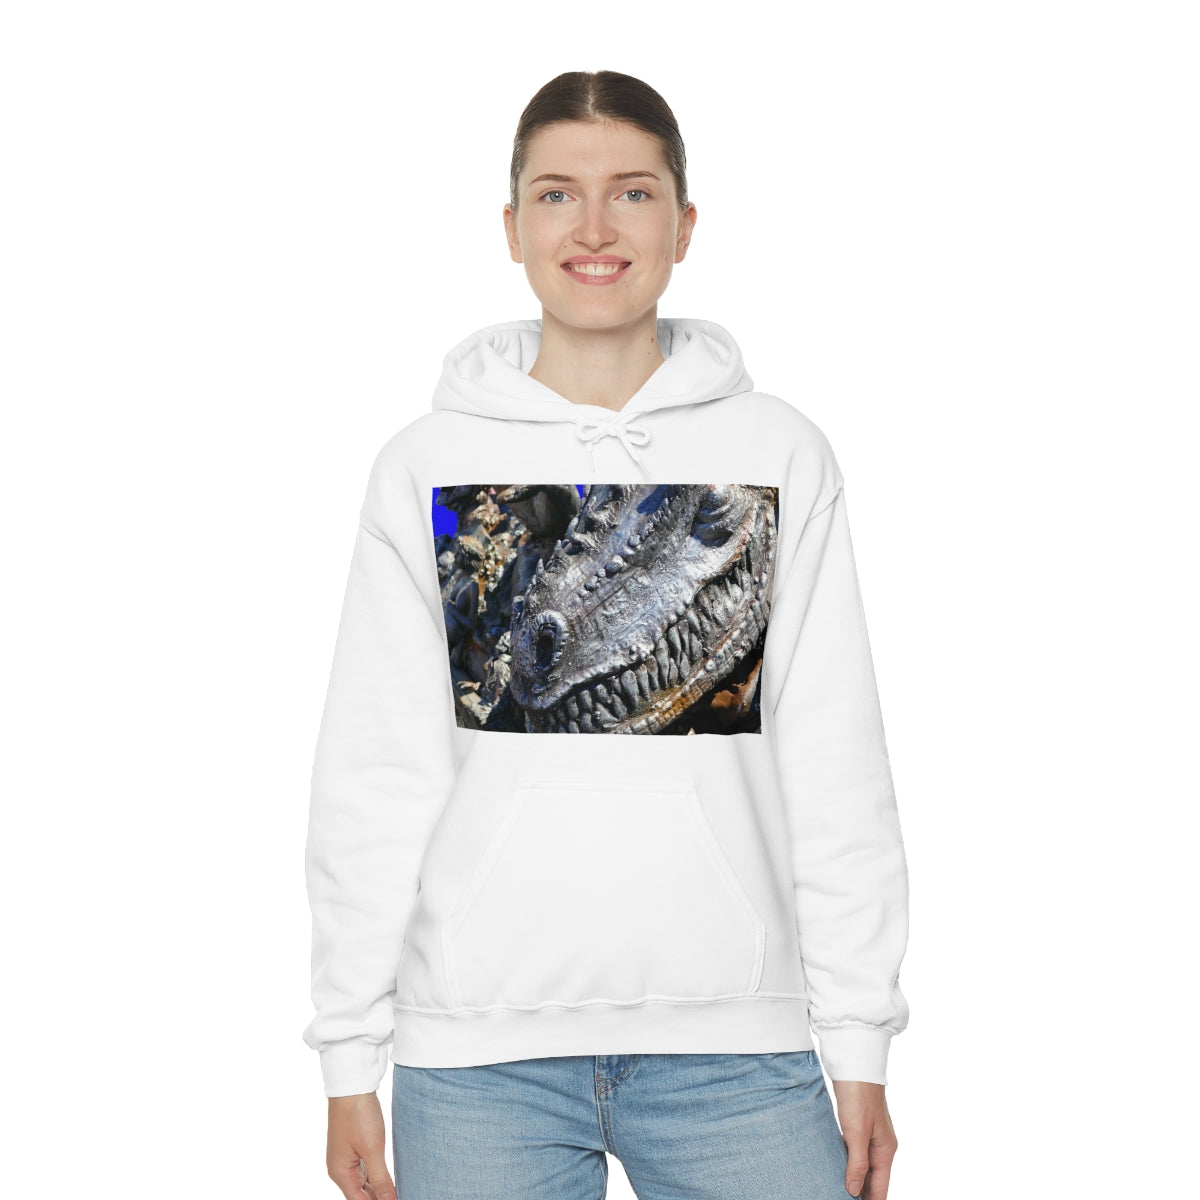 Delectable Vision - Unisex Heavy Blend Hooded Sweatshirt - Fry1Productions